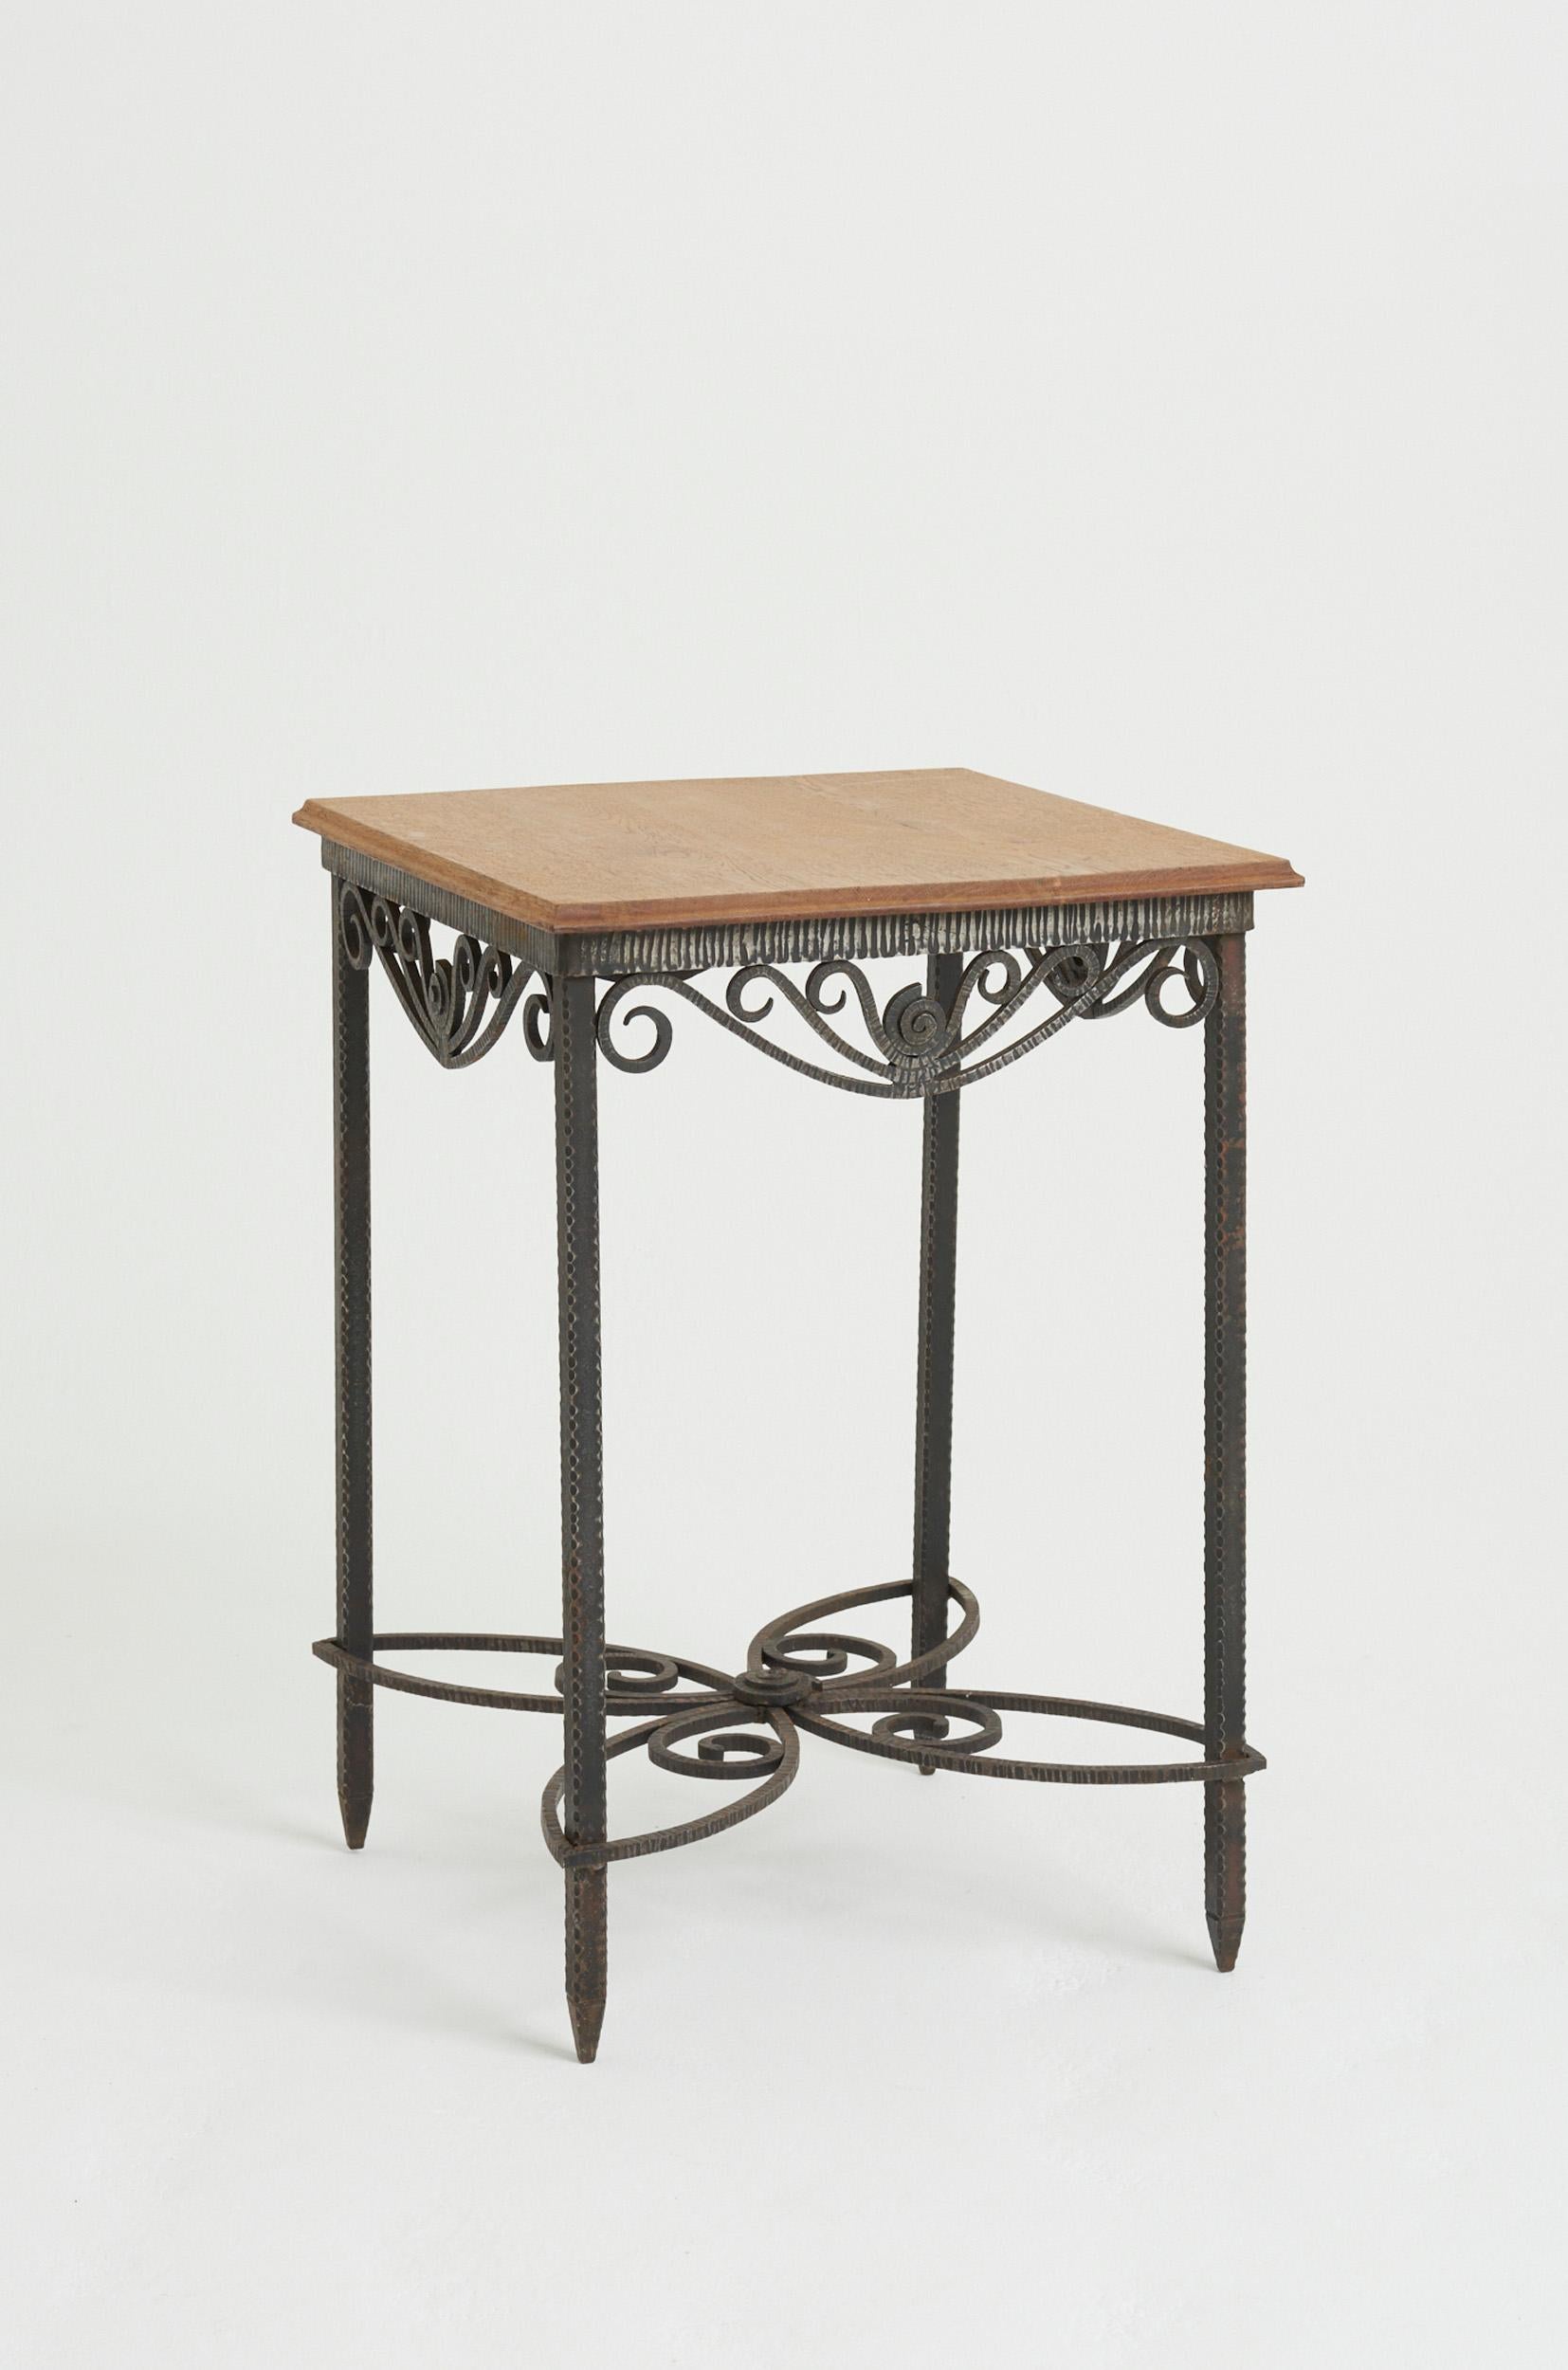 An Art Deco wrought iron and oak top table.
France, Circa 1920
75 cm high by 54 cm wide by 54 cm depth